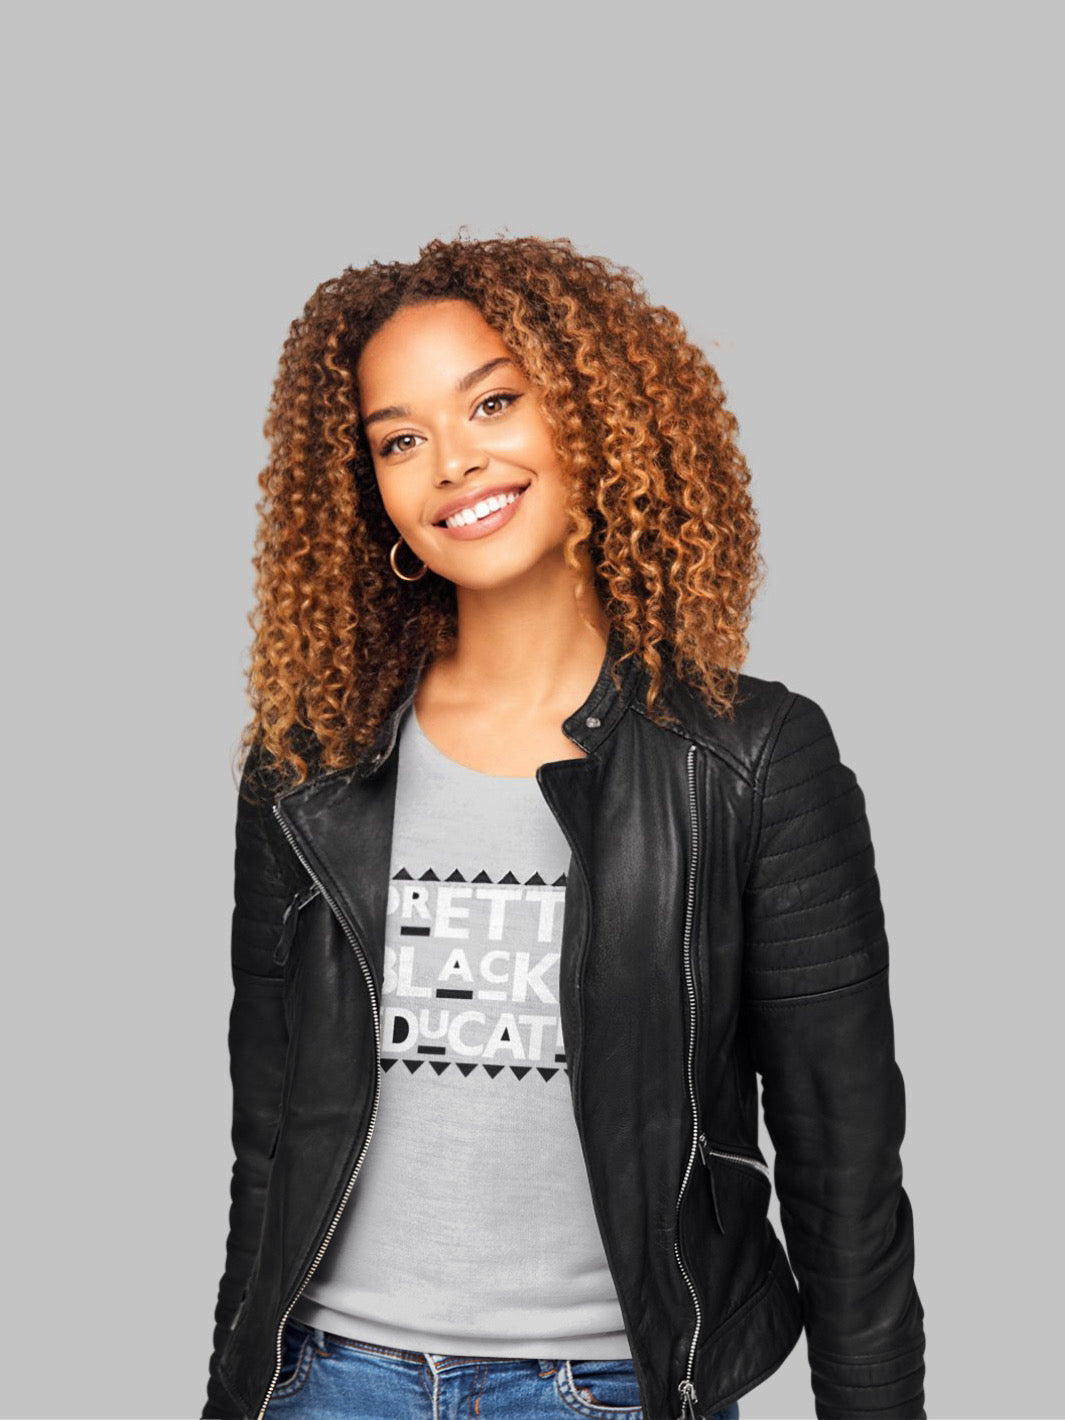  t-shirt in heather gray  featuring the phrase 'Pretty, Black, and Educated' in bold BLACK AND WHITE  lettering across the front. The font is Bold letters, emphasizing a message of empowerment and pride.